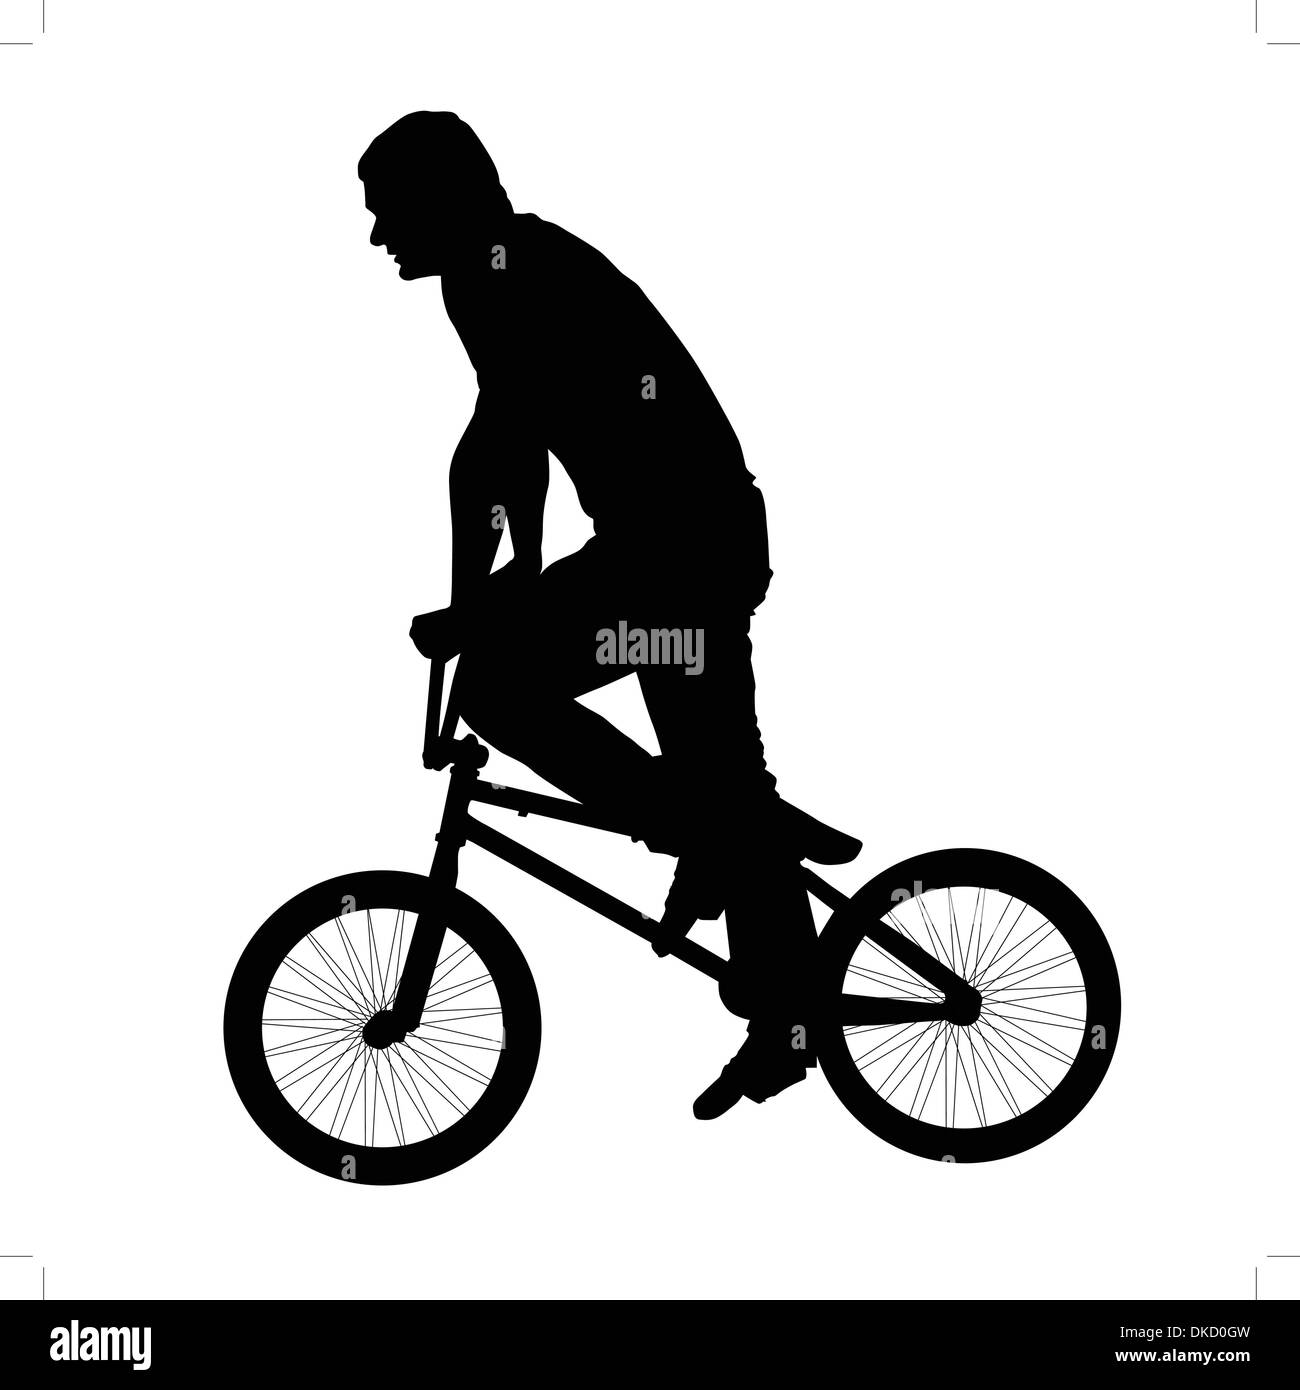 Black silhouette of a young man on a bike Stock Vector